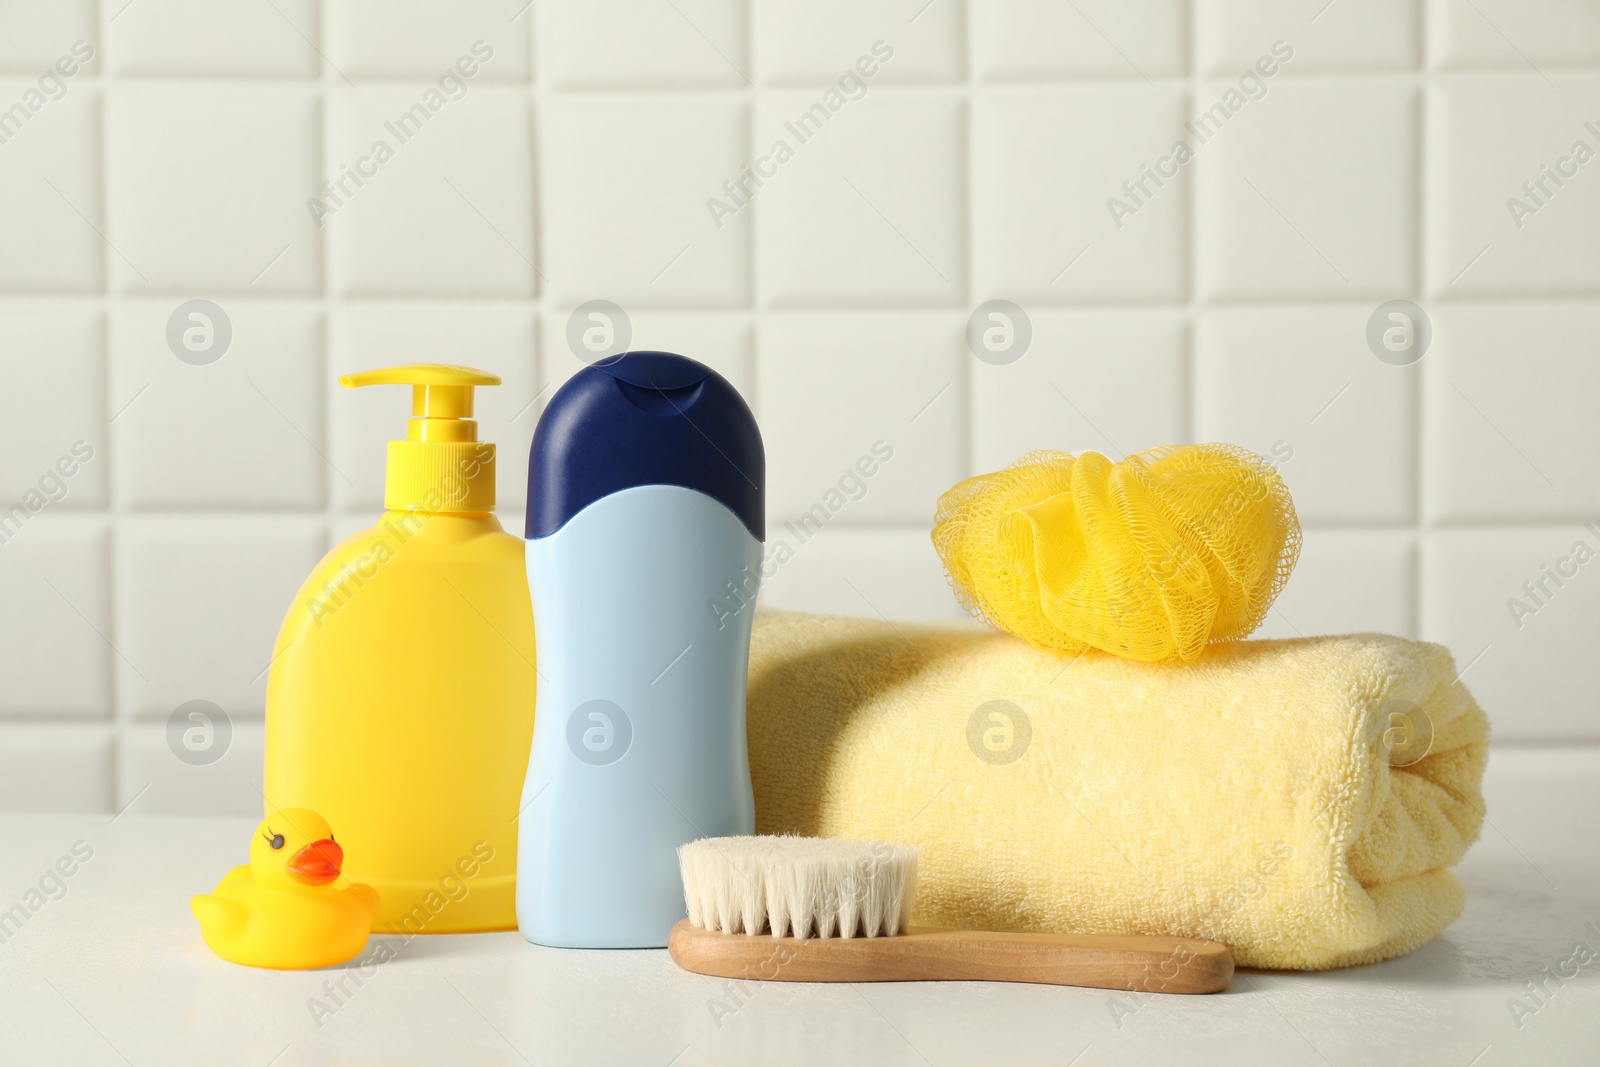 Photo of Baby cosmetic products, bath duck, brush and towel on white table against tiled wall